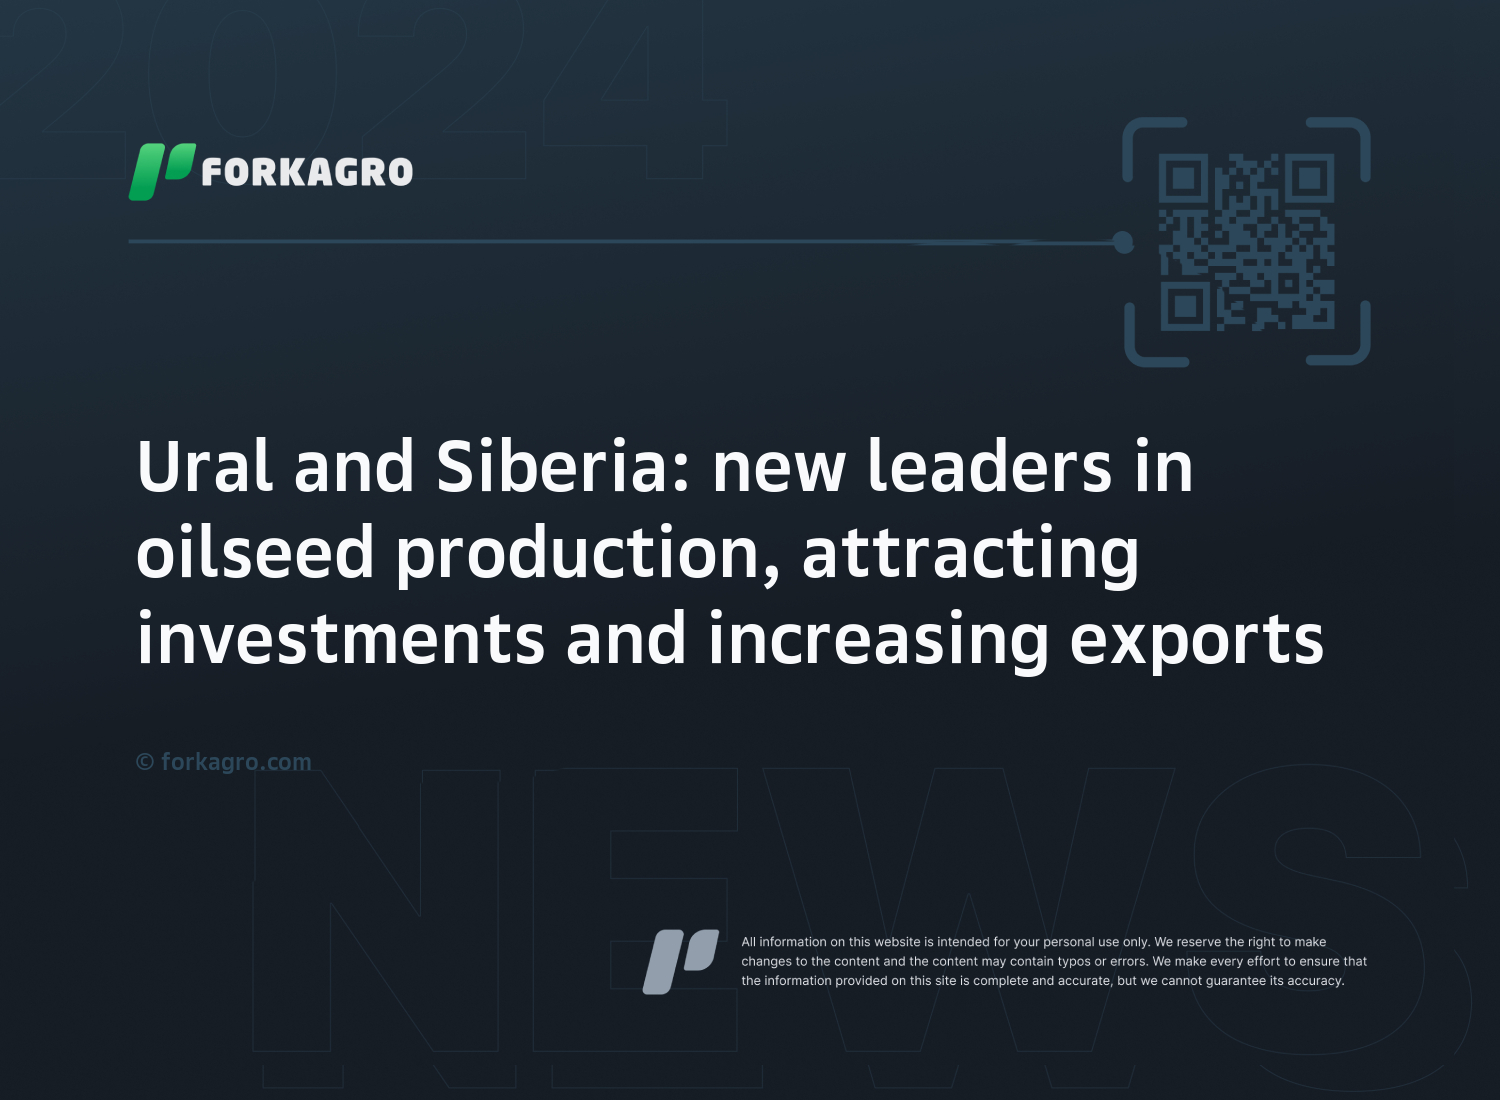 Ural and Siberia: new leaders in oilseed production, attracting investments and increasing exports